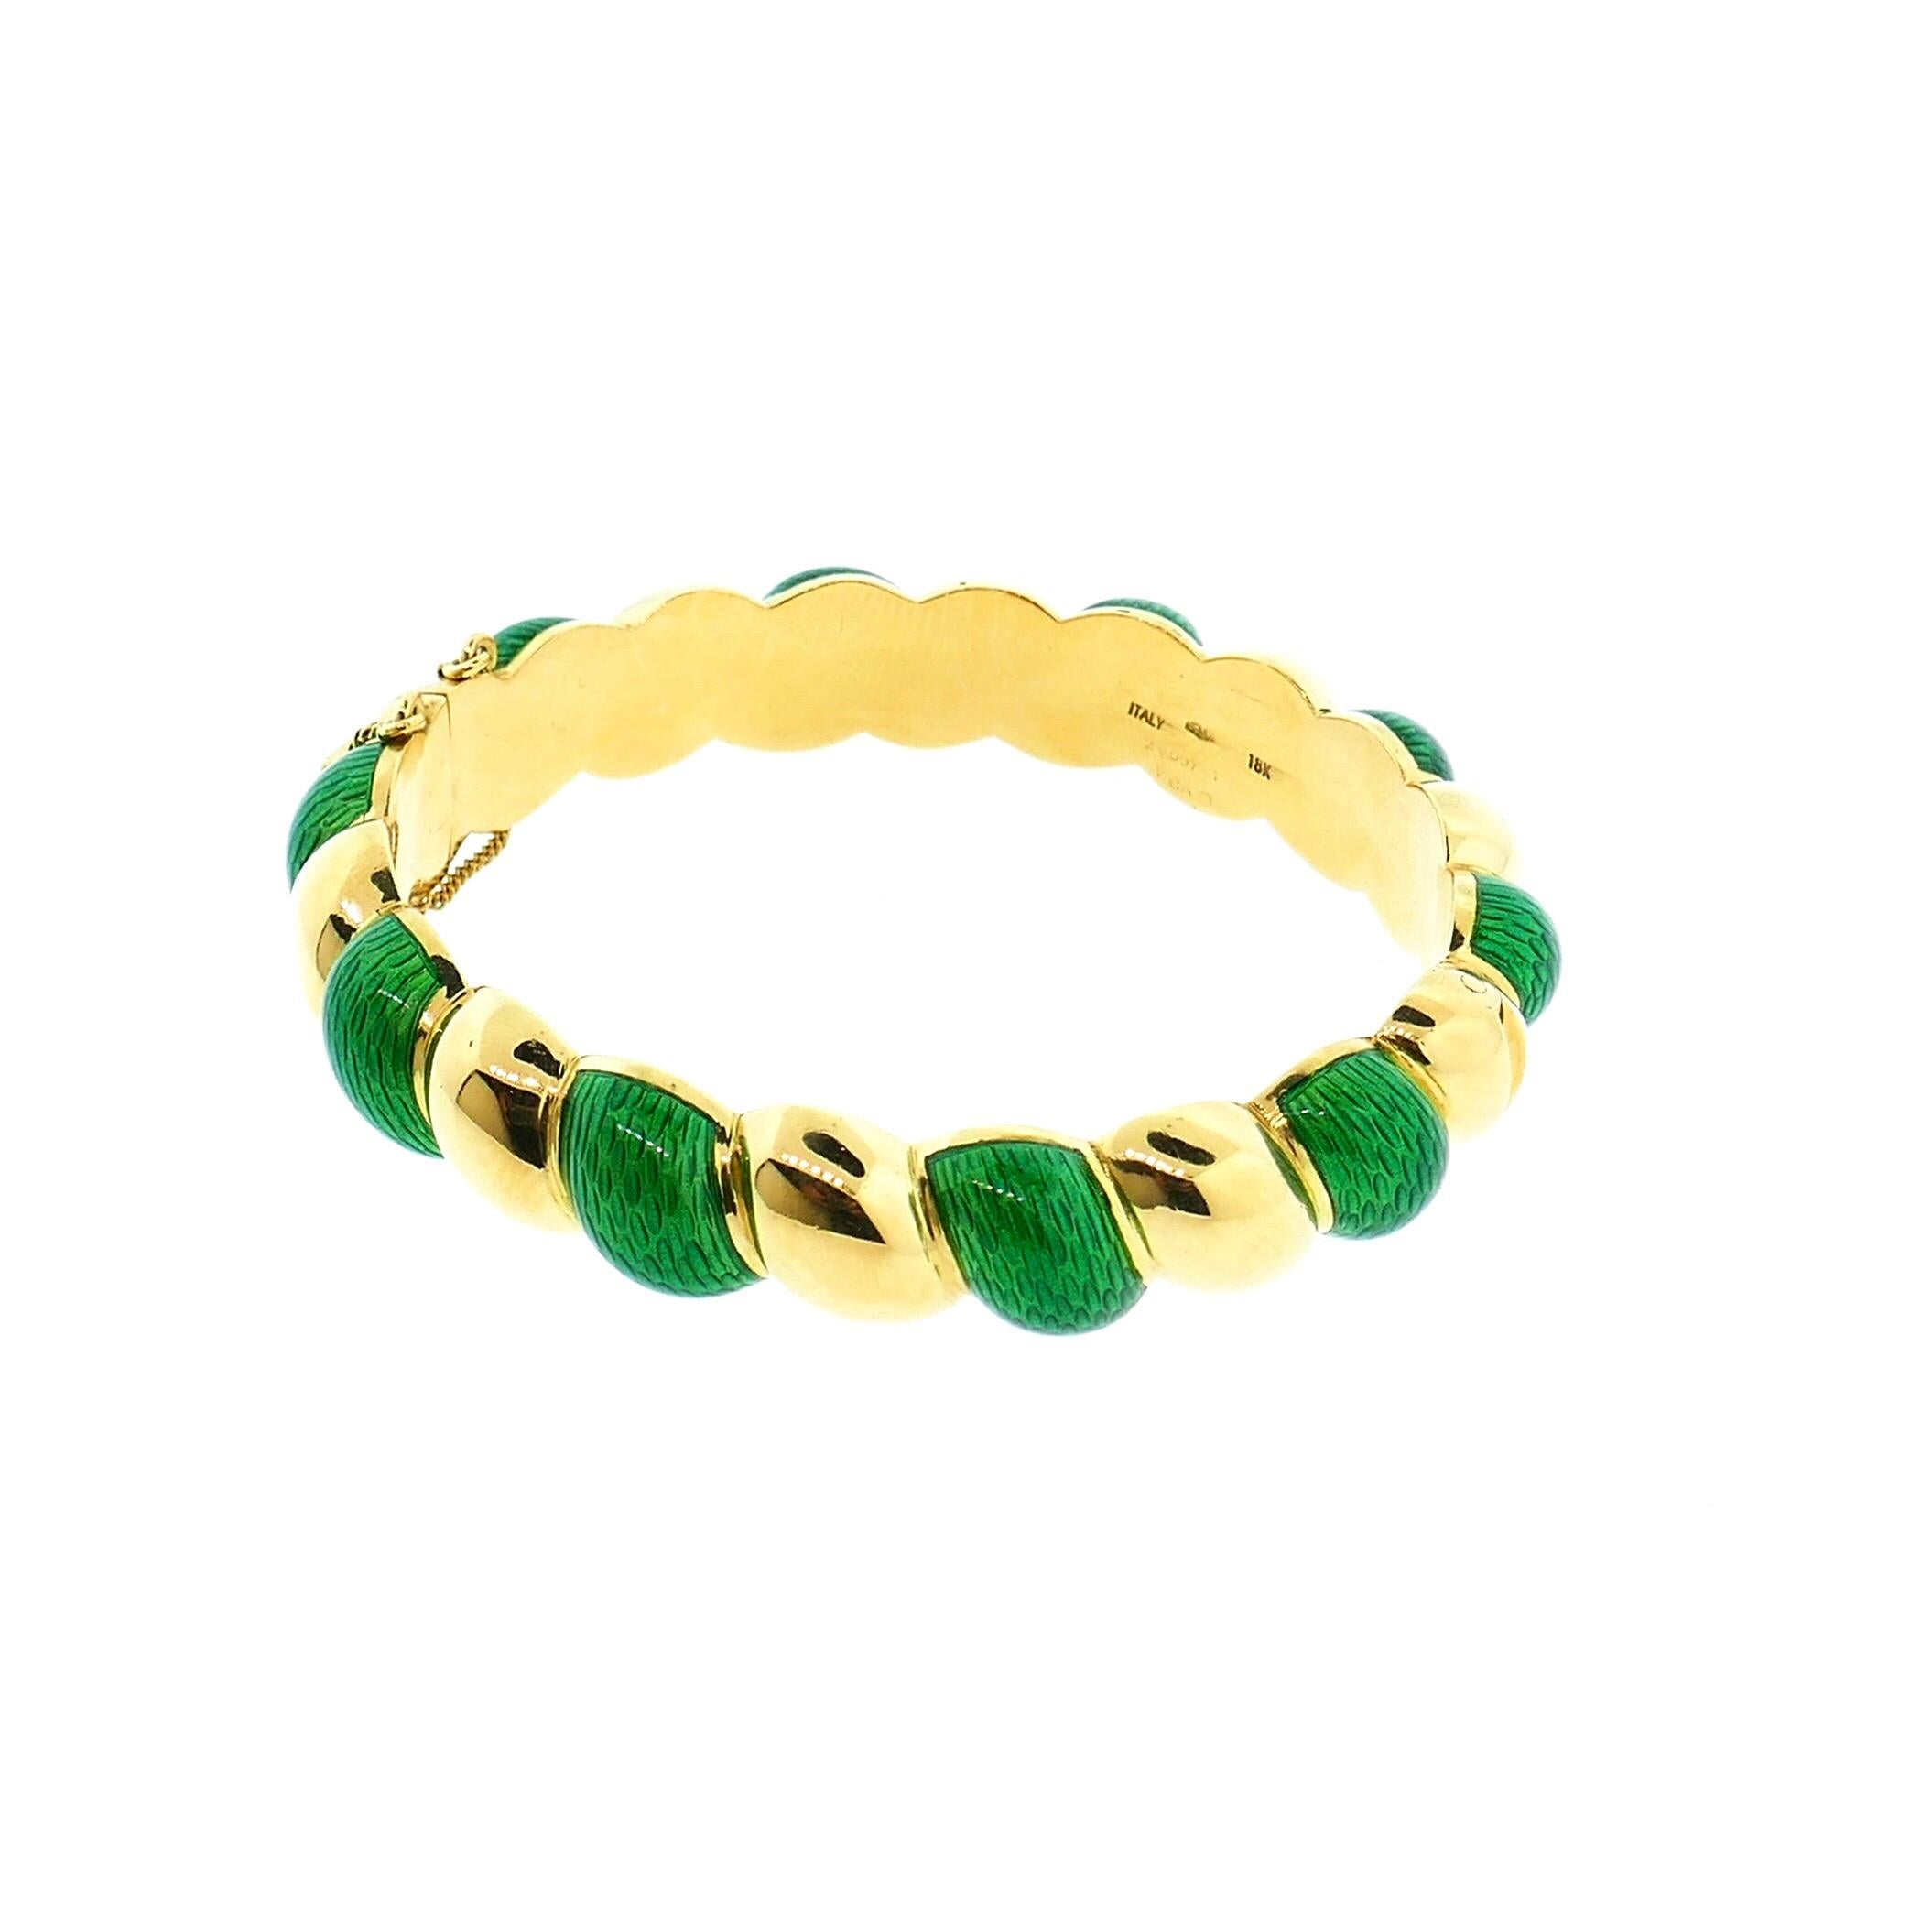 Van Cleef & Arpels 18 Karat Yellow Enamel Bangle

This is a beautiful Van Cleef & Arpels bangle that features stunning green enamel work. Very wearable and chic!   

Weight: 49.5 Grams 

Size: Will Comfortably Fit a 6.5